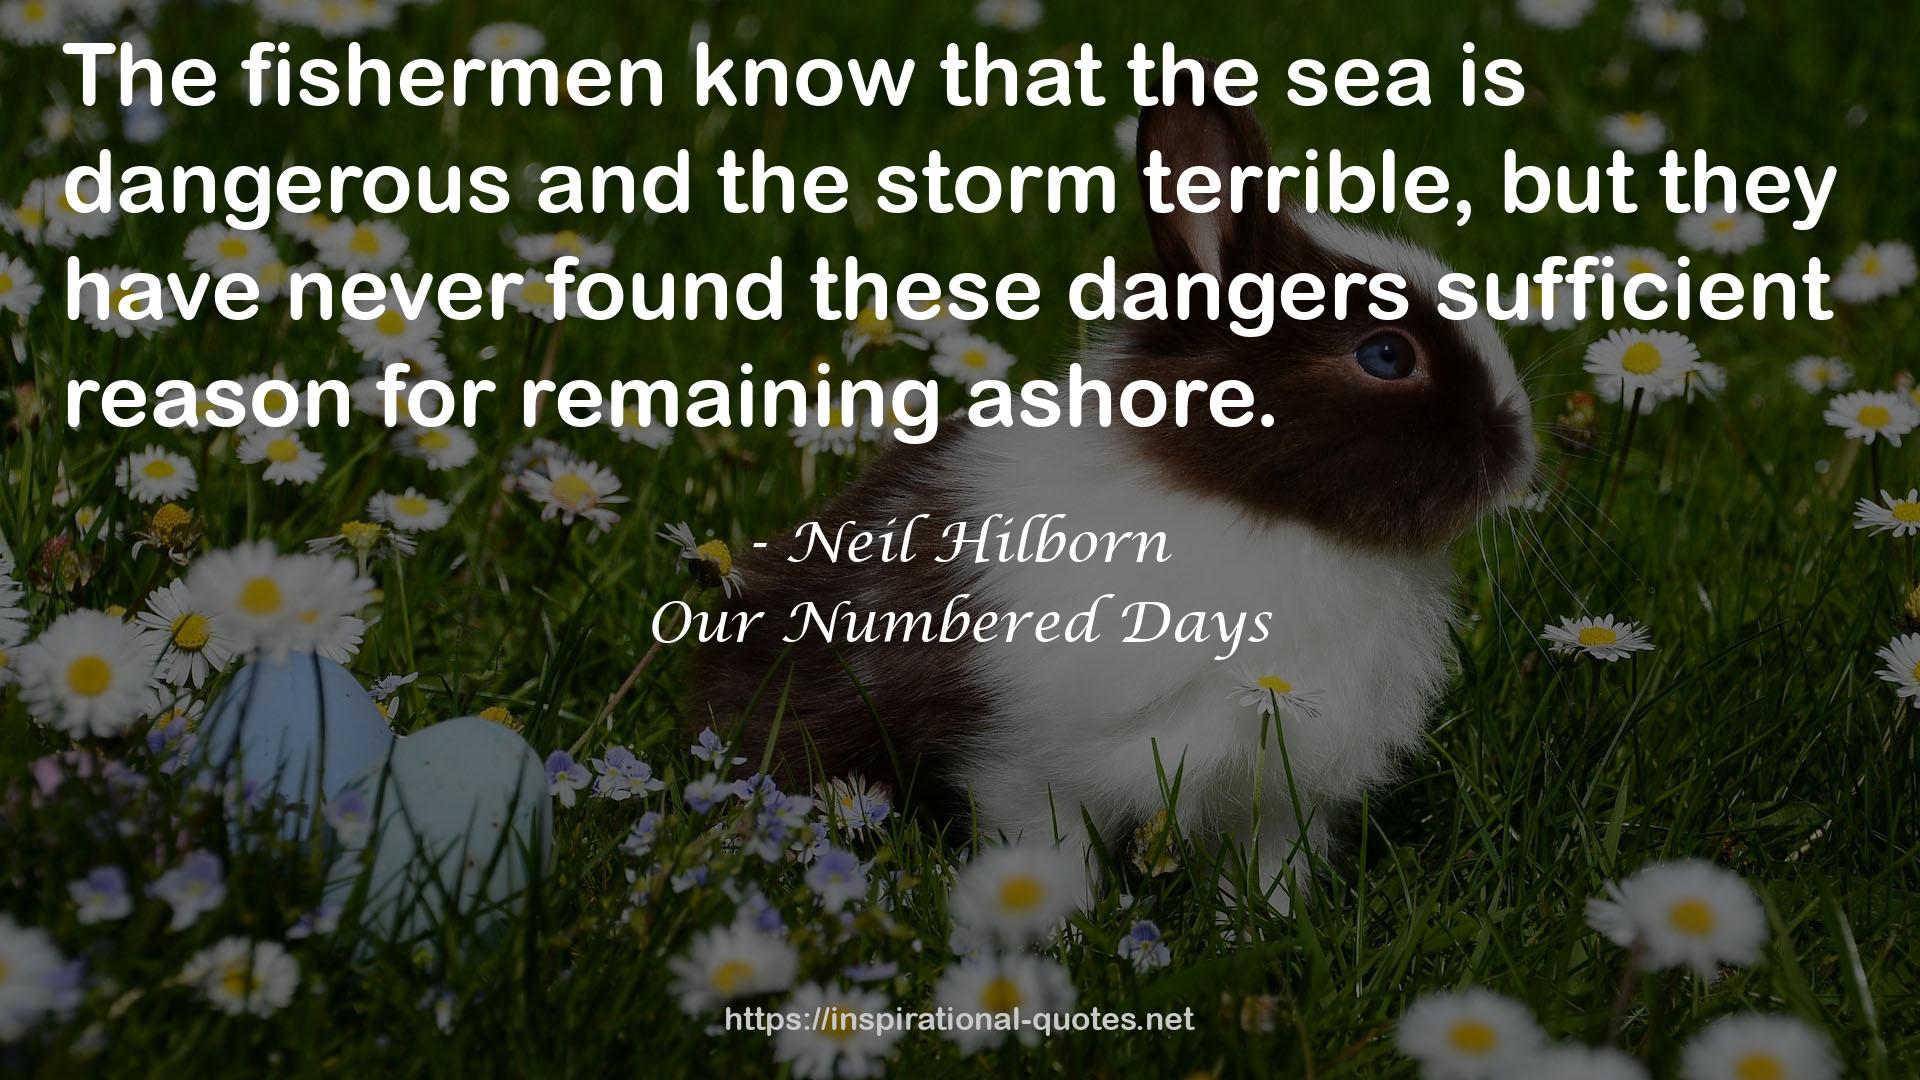 Our Numbered Days QUOTES